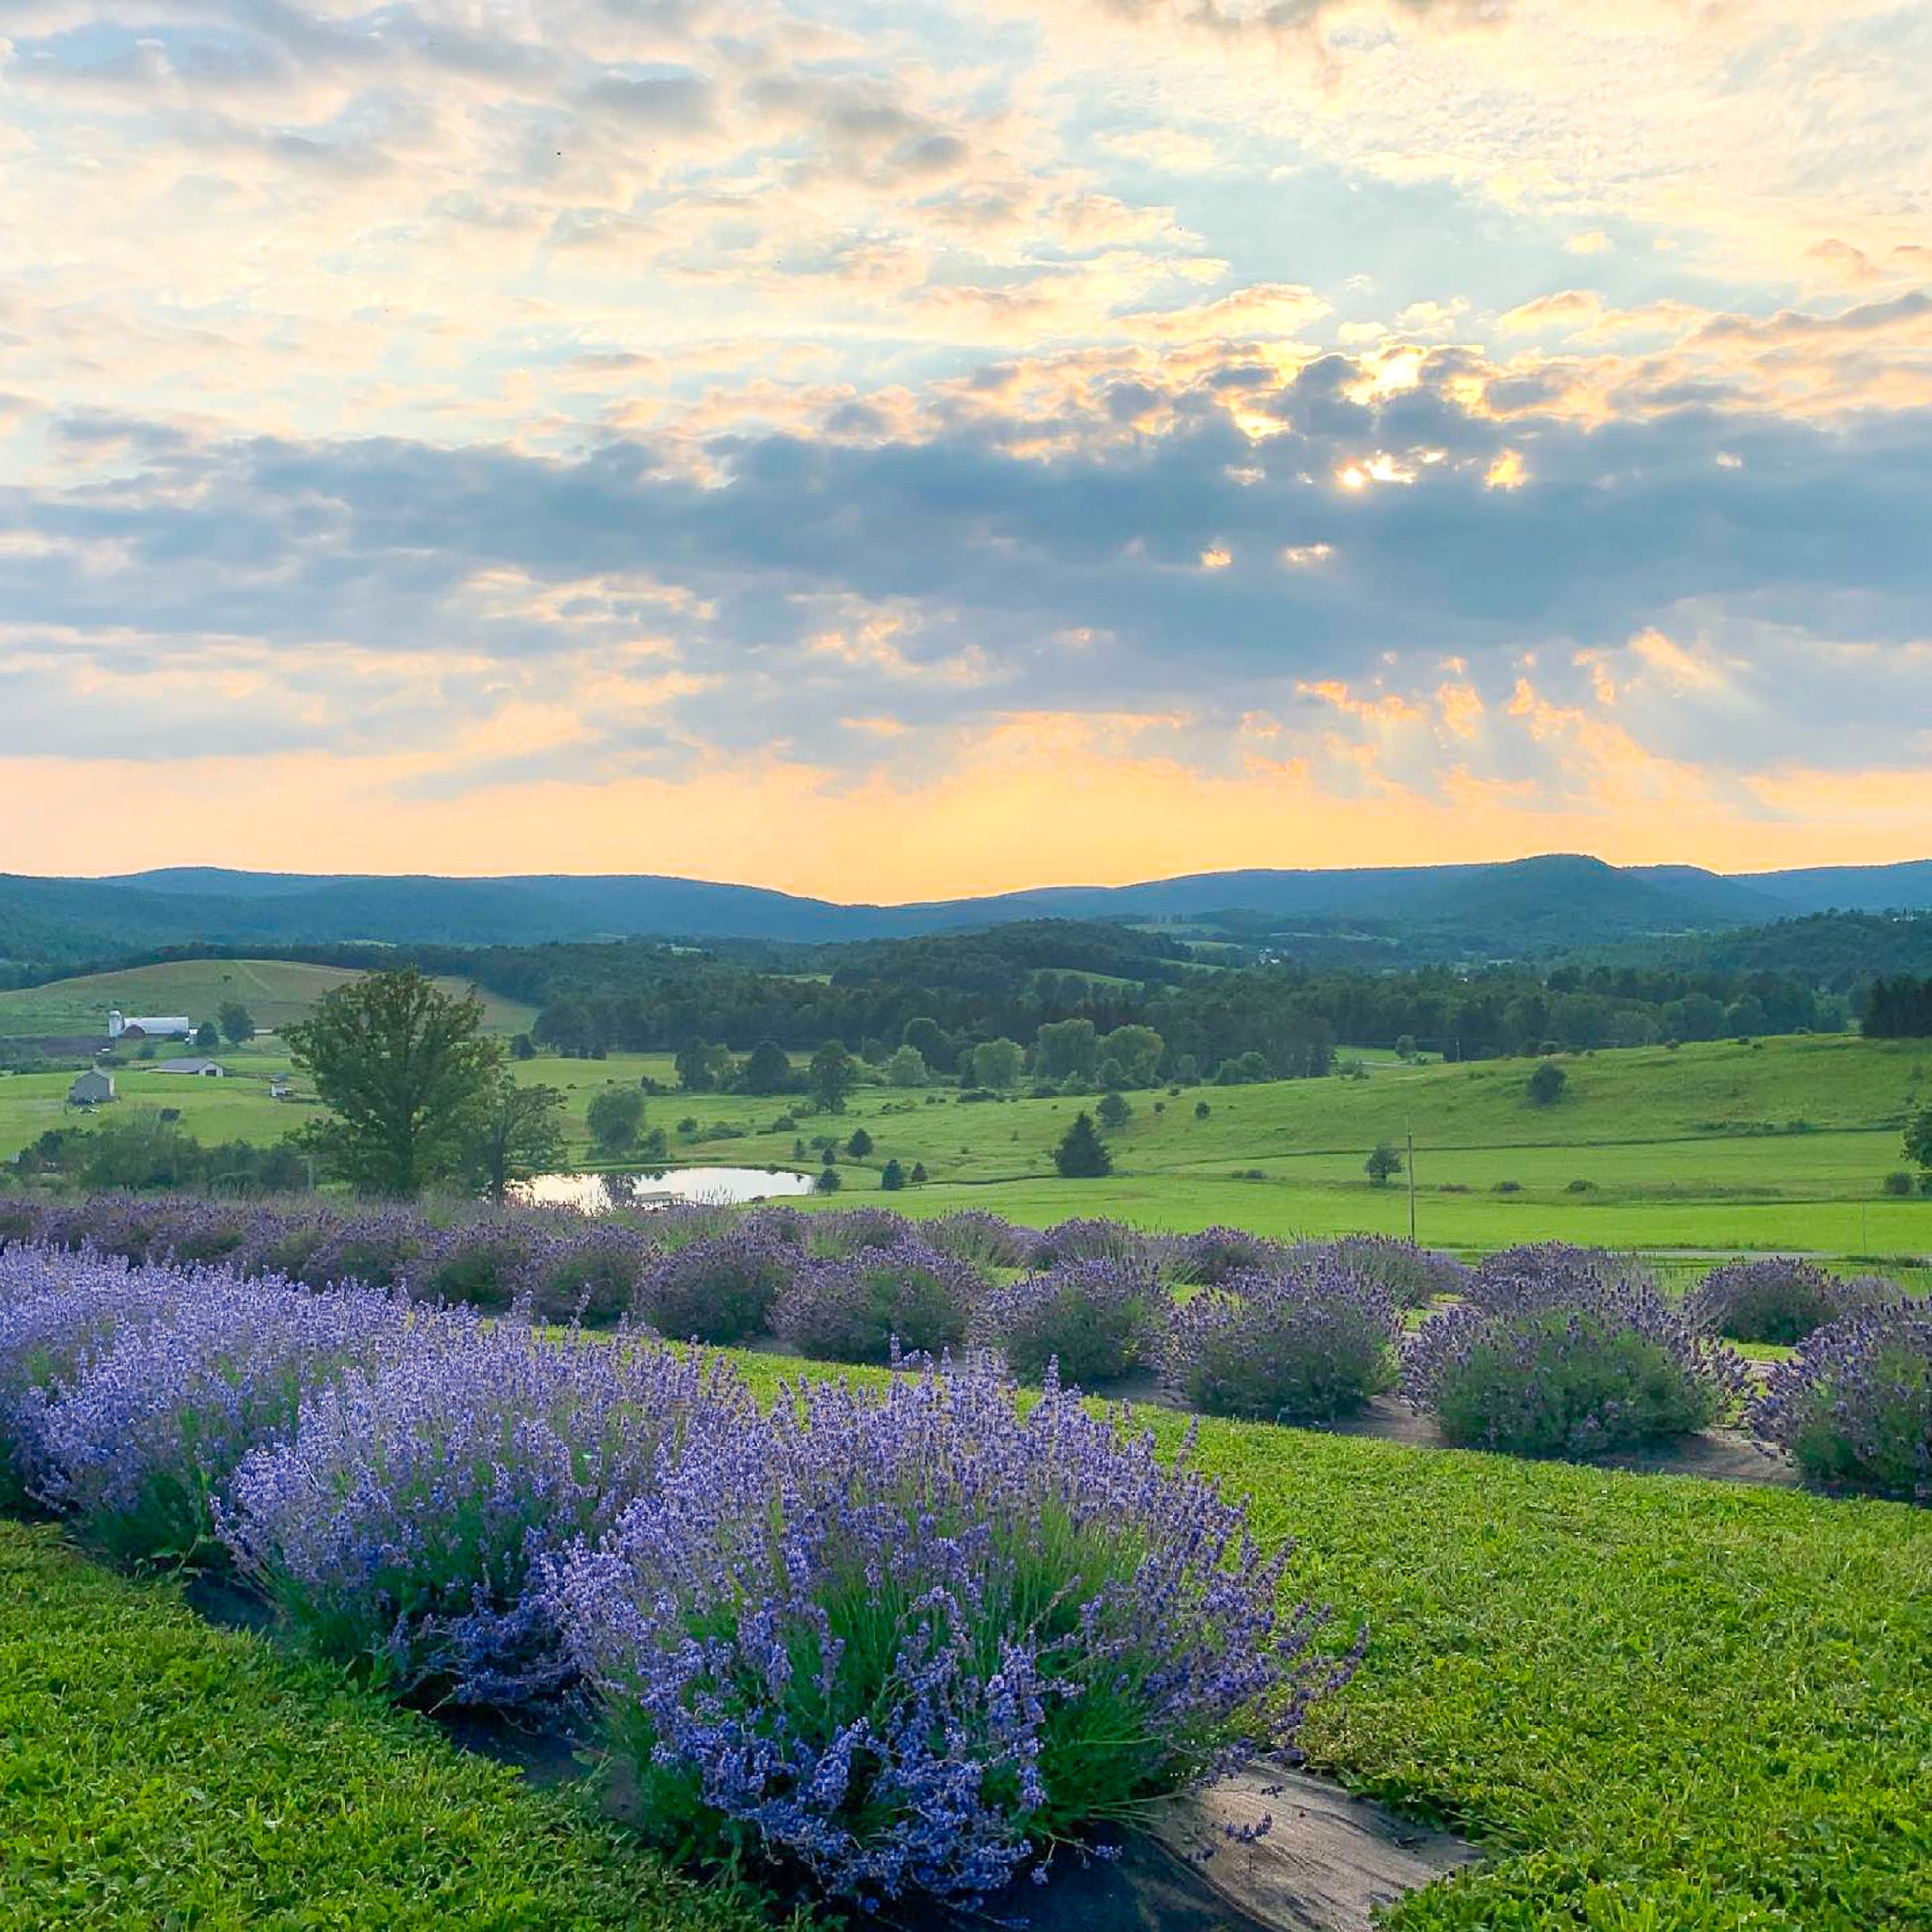 Lavender field and sunset